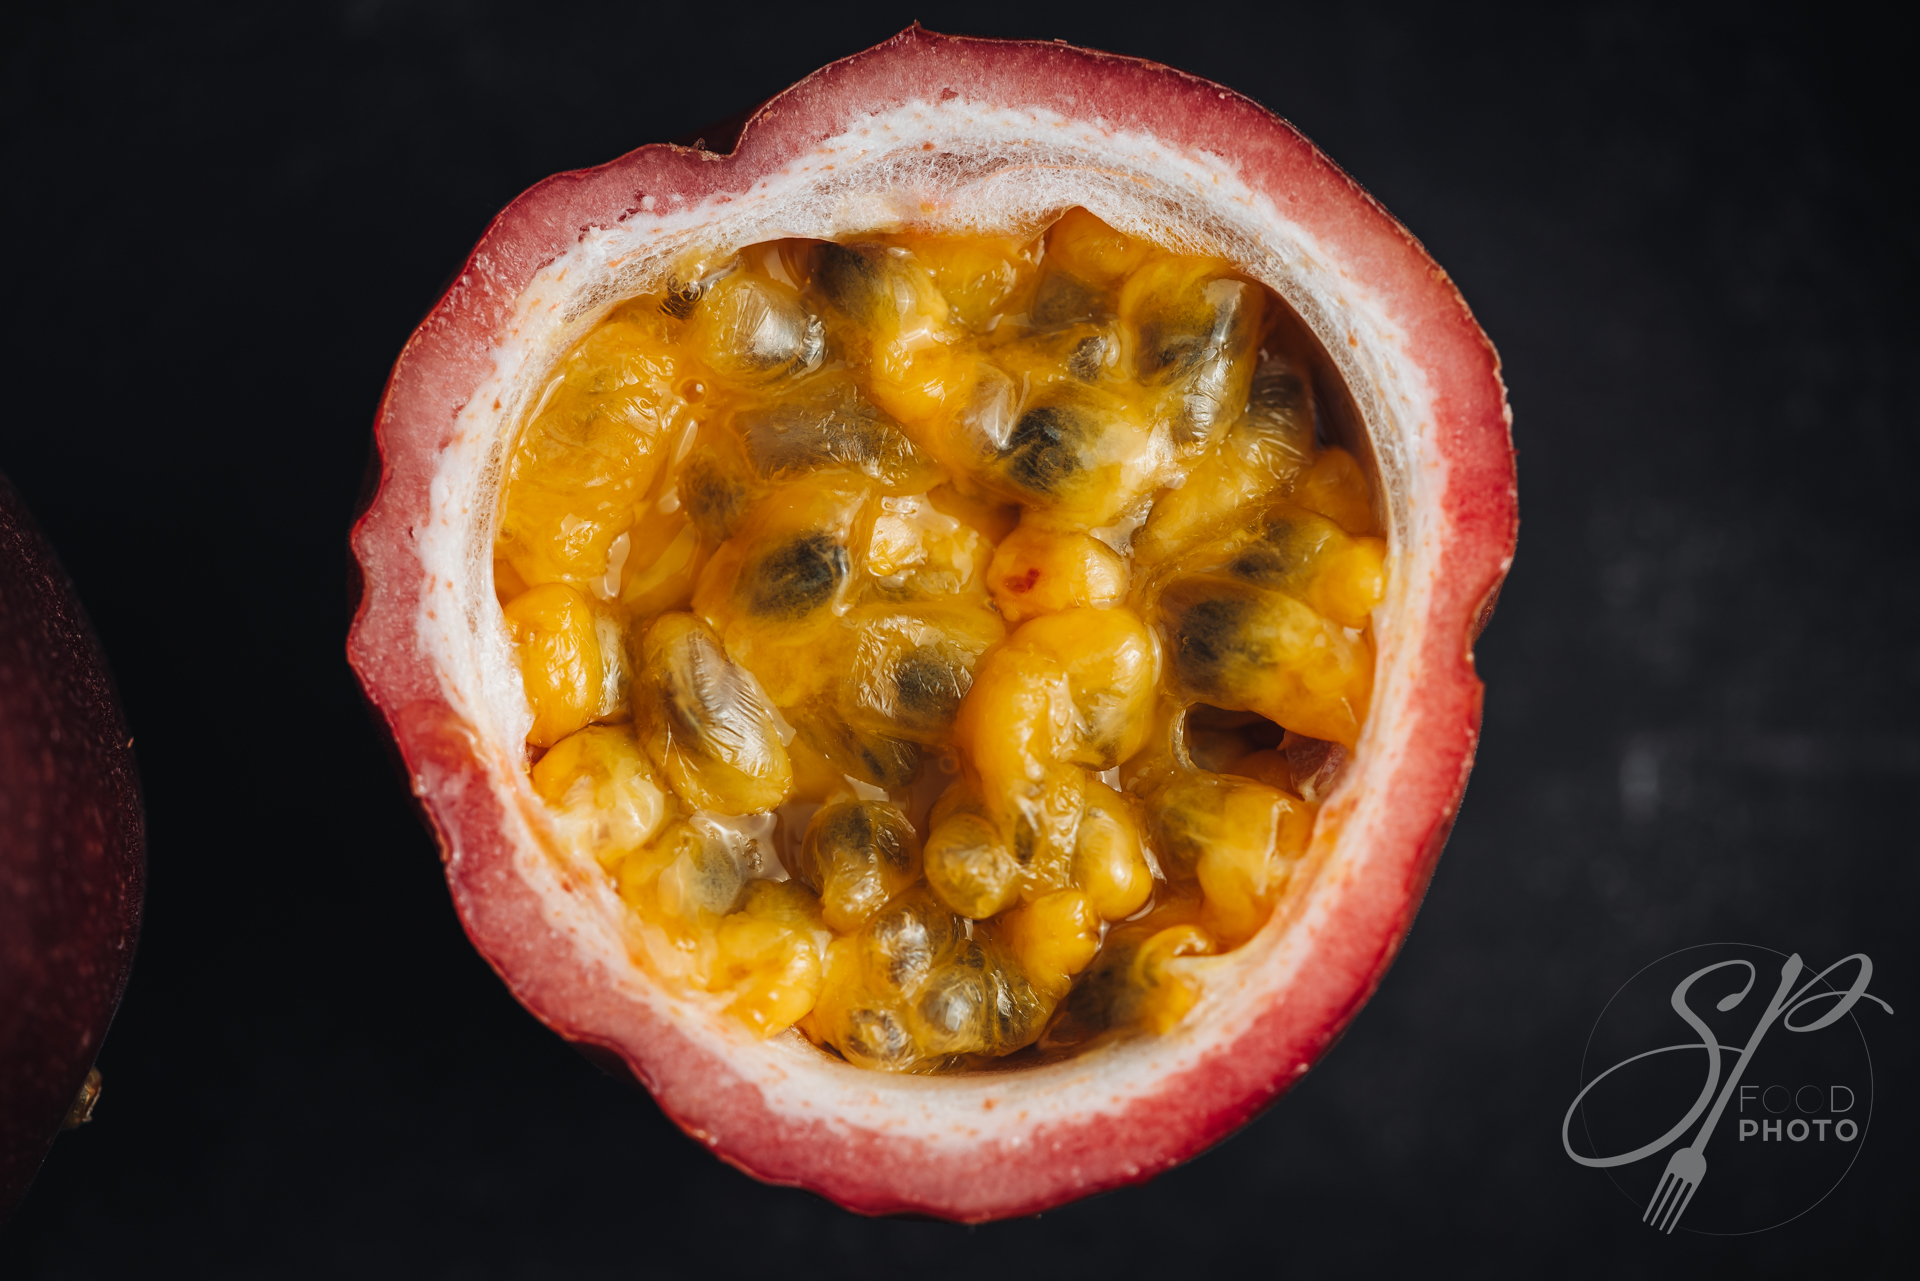 Fresh and juicy raw passion fruit